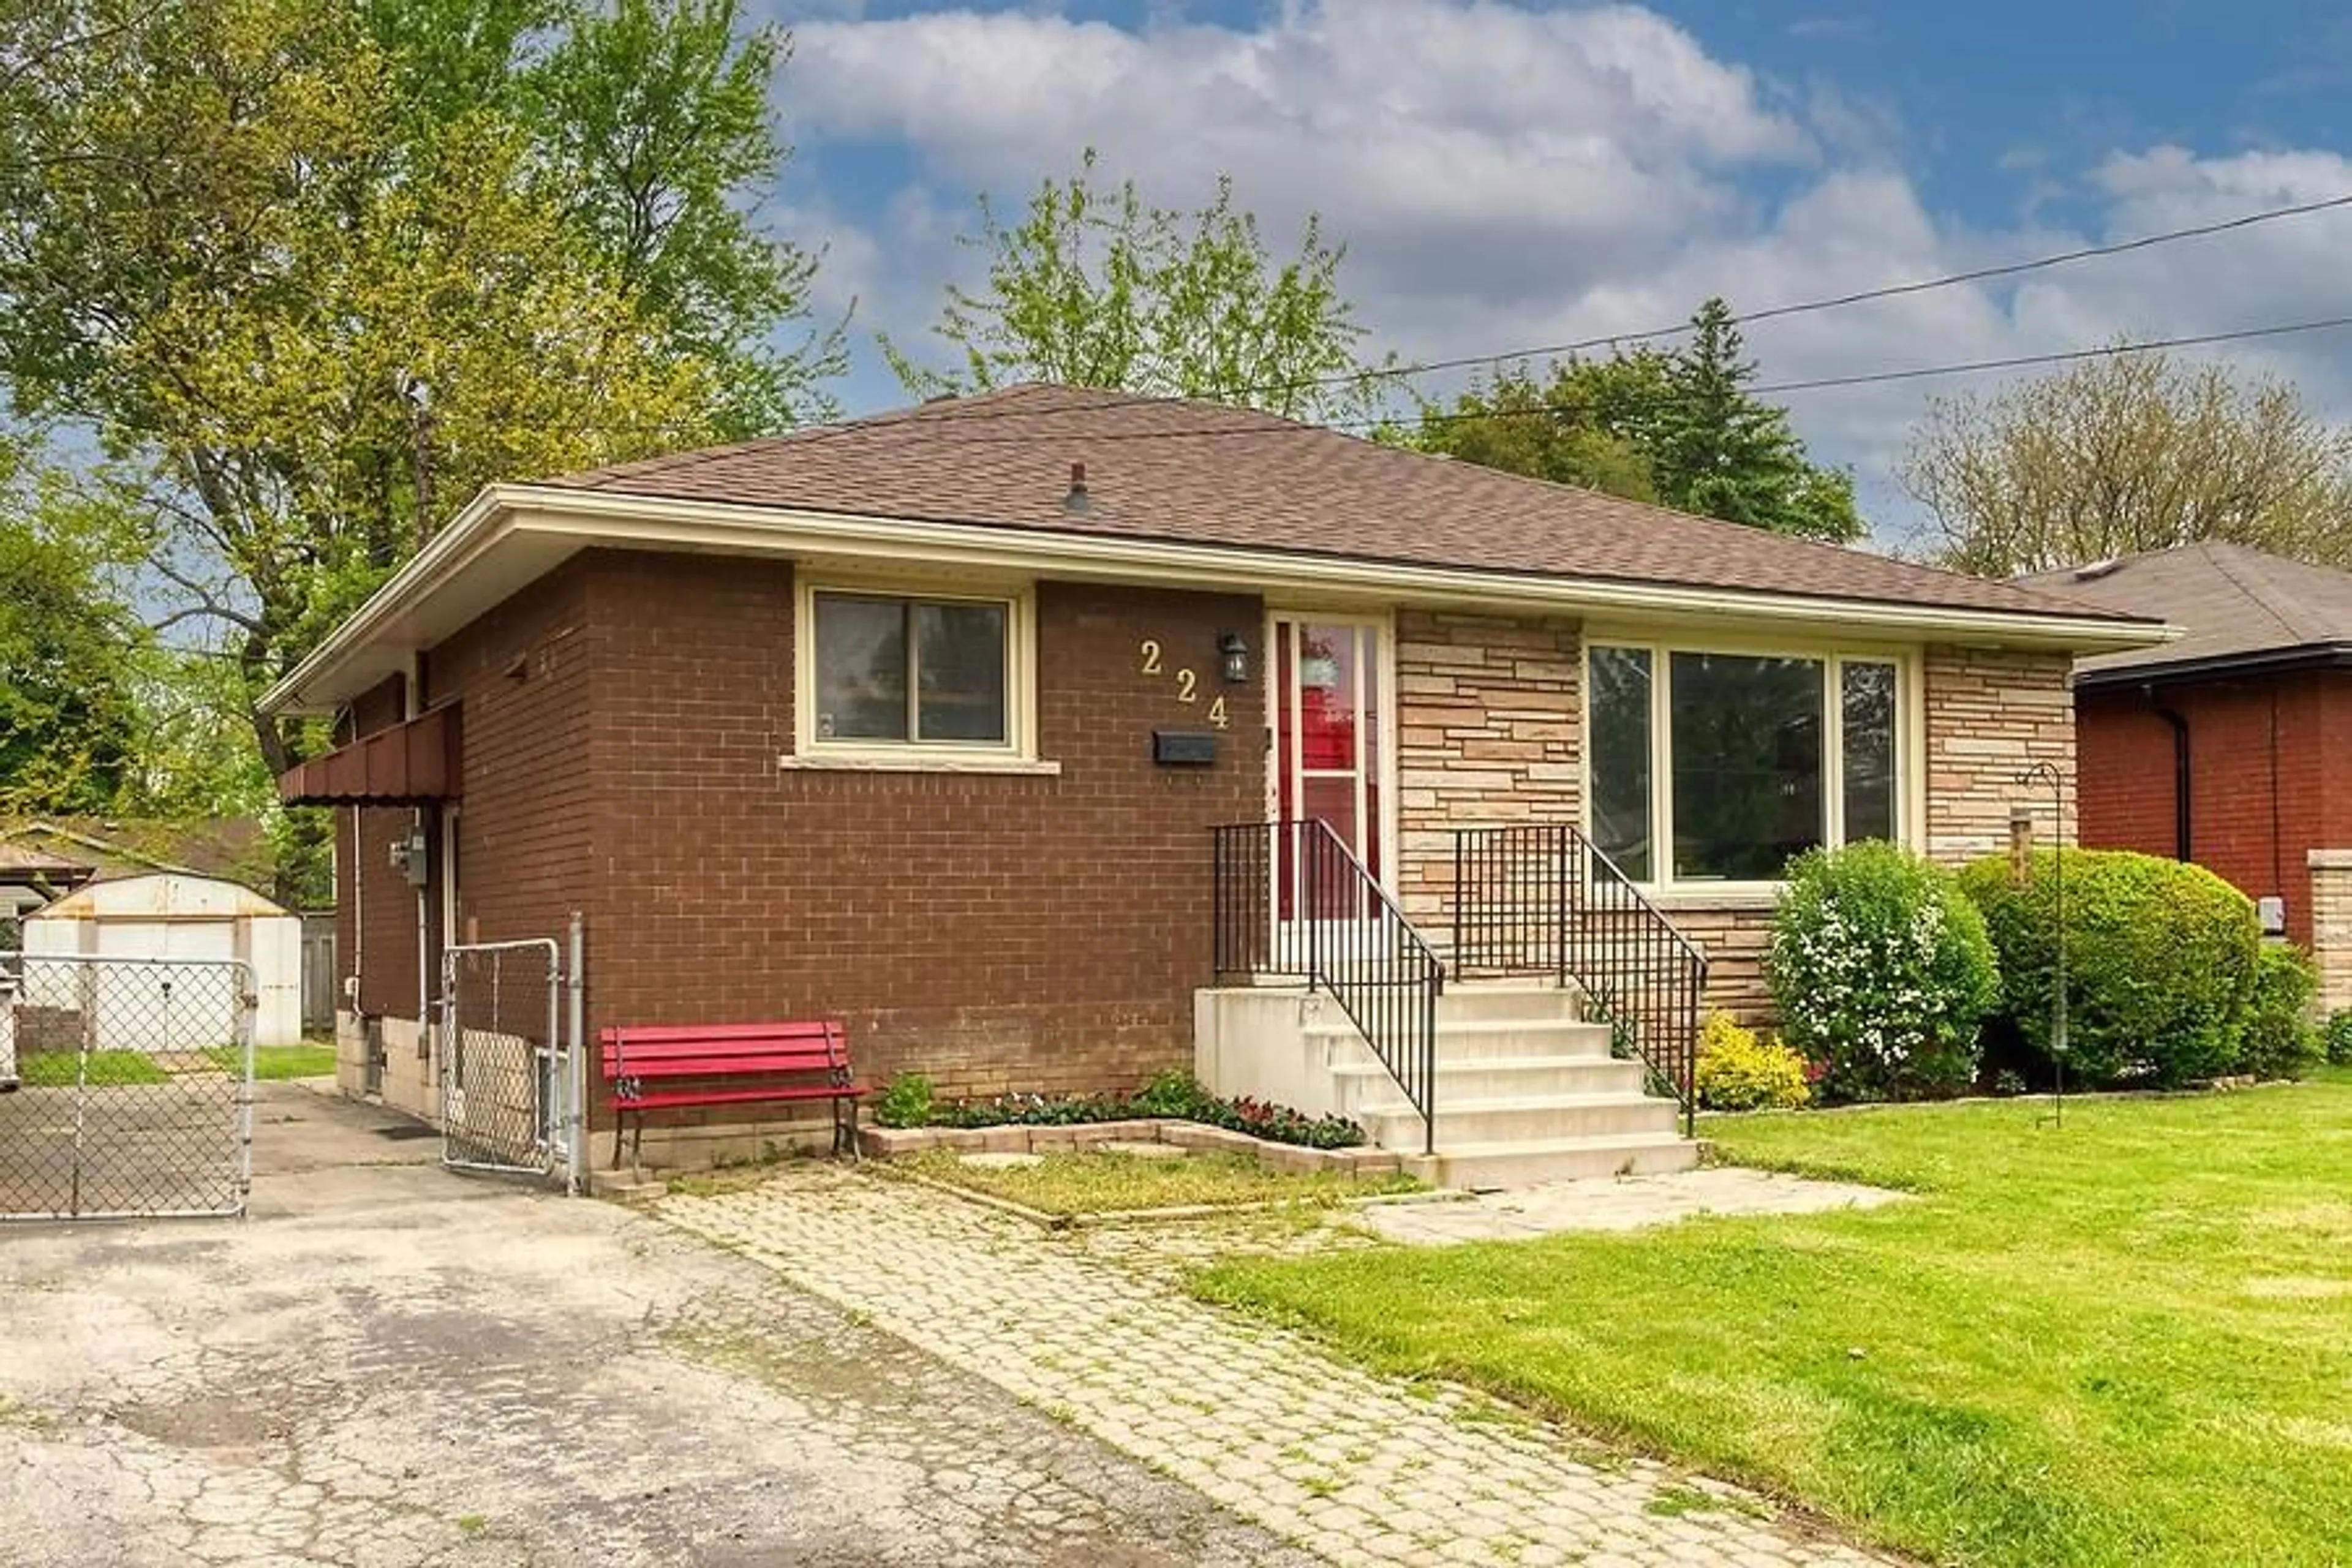 Home with brick exterior material for 224 WEST 18TH St, Hamilton Ontario L9C 4G9